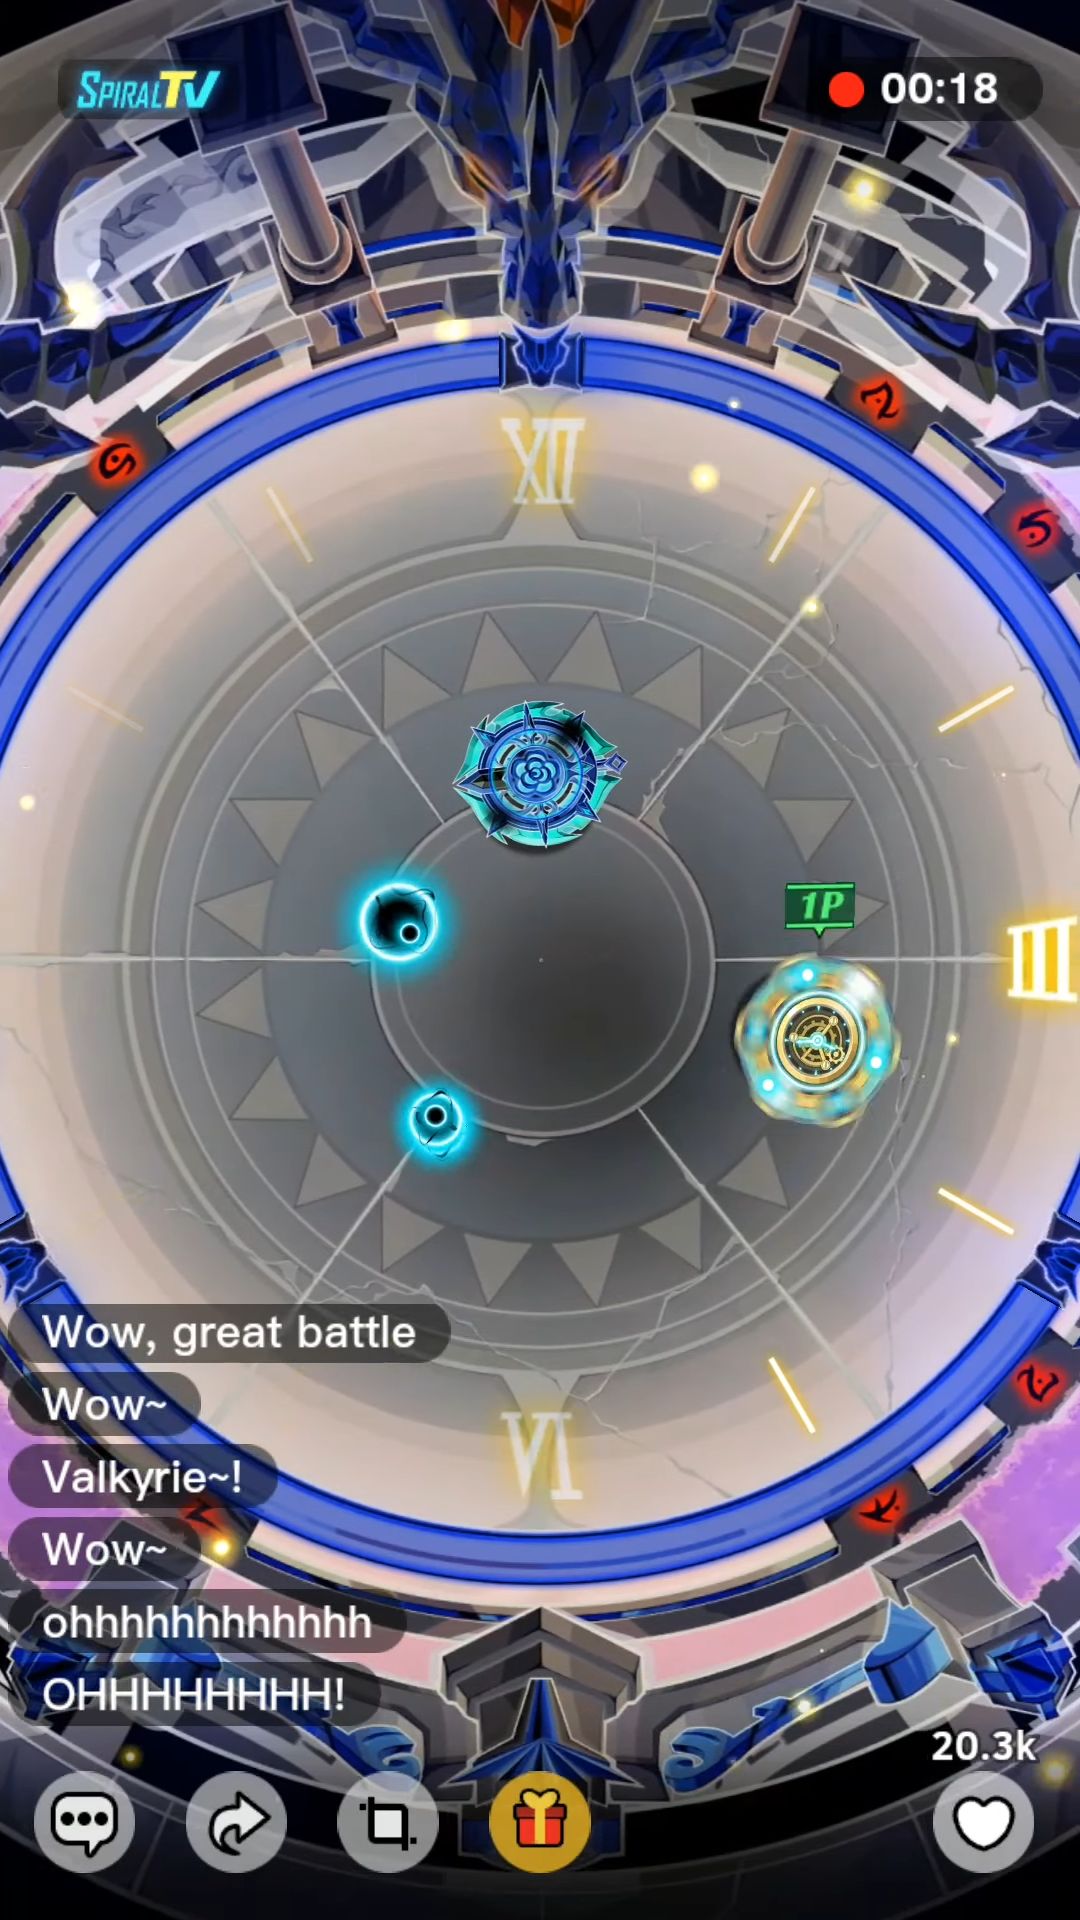 Gameplay of the Spiral Warrior for Android phone or tablet.